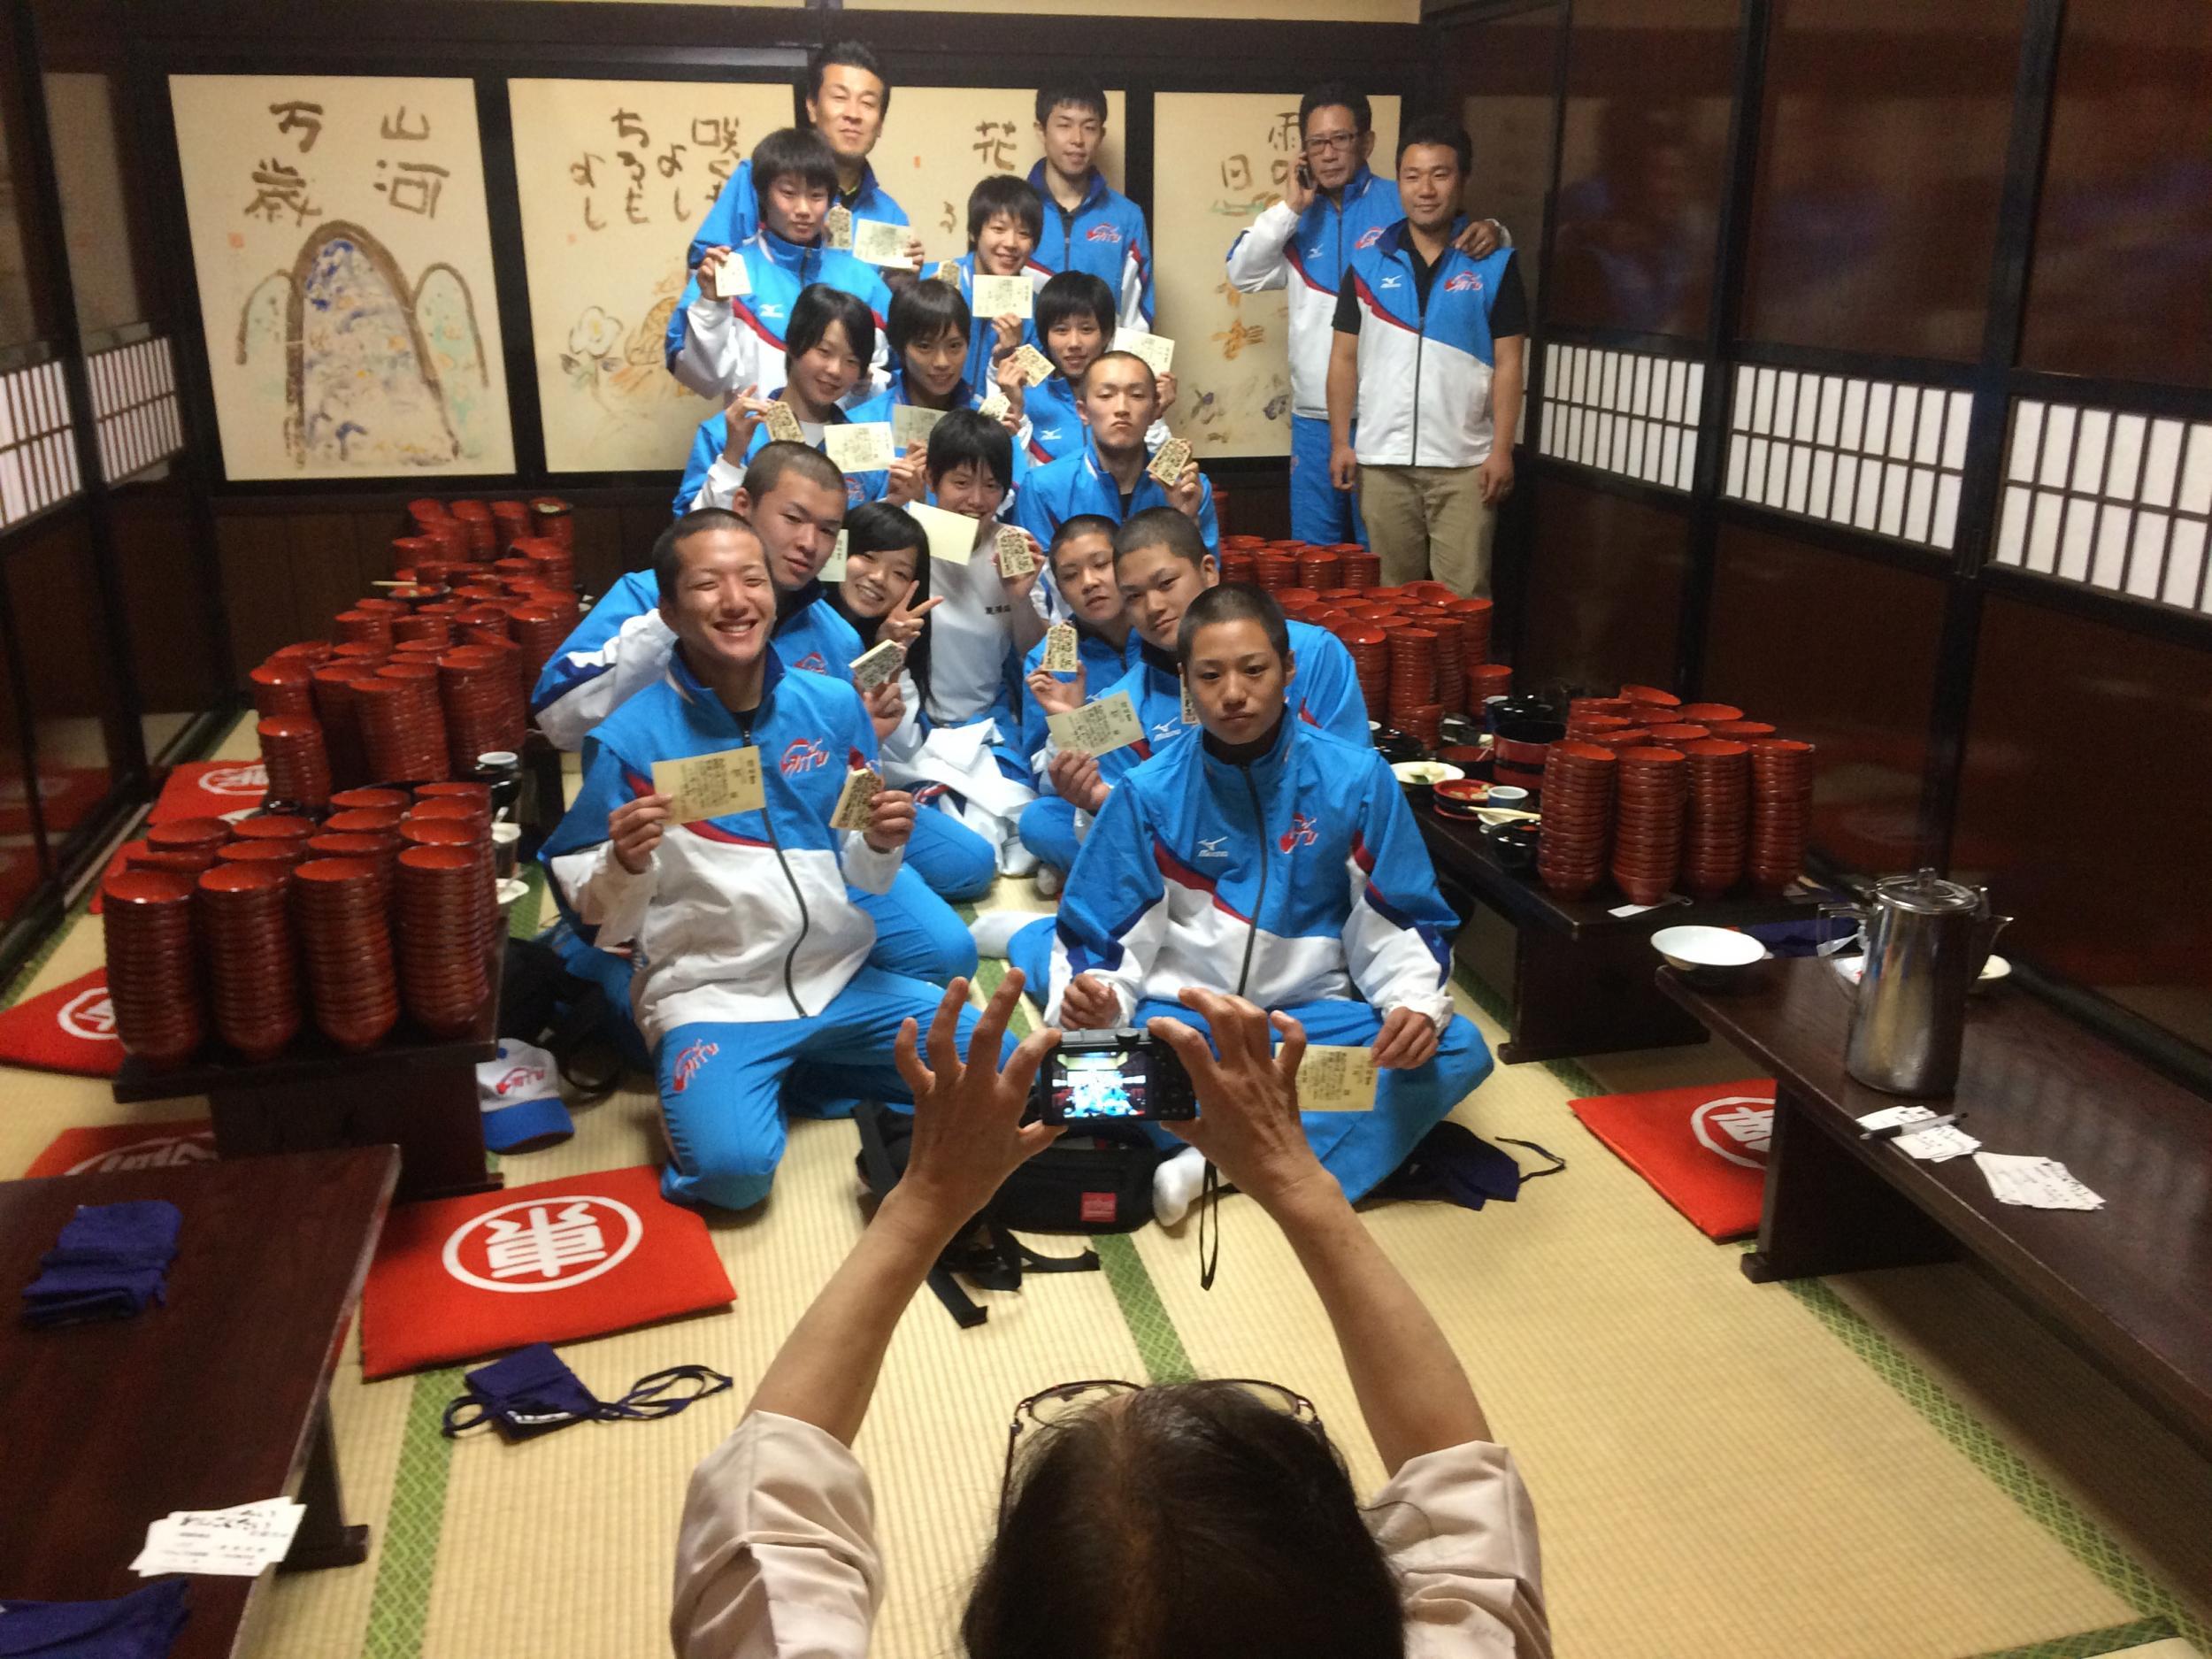 Our writer found himself in a wanko competition with kendo champs